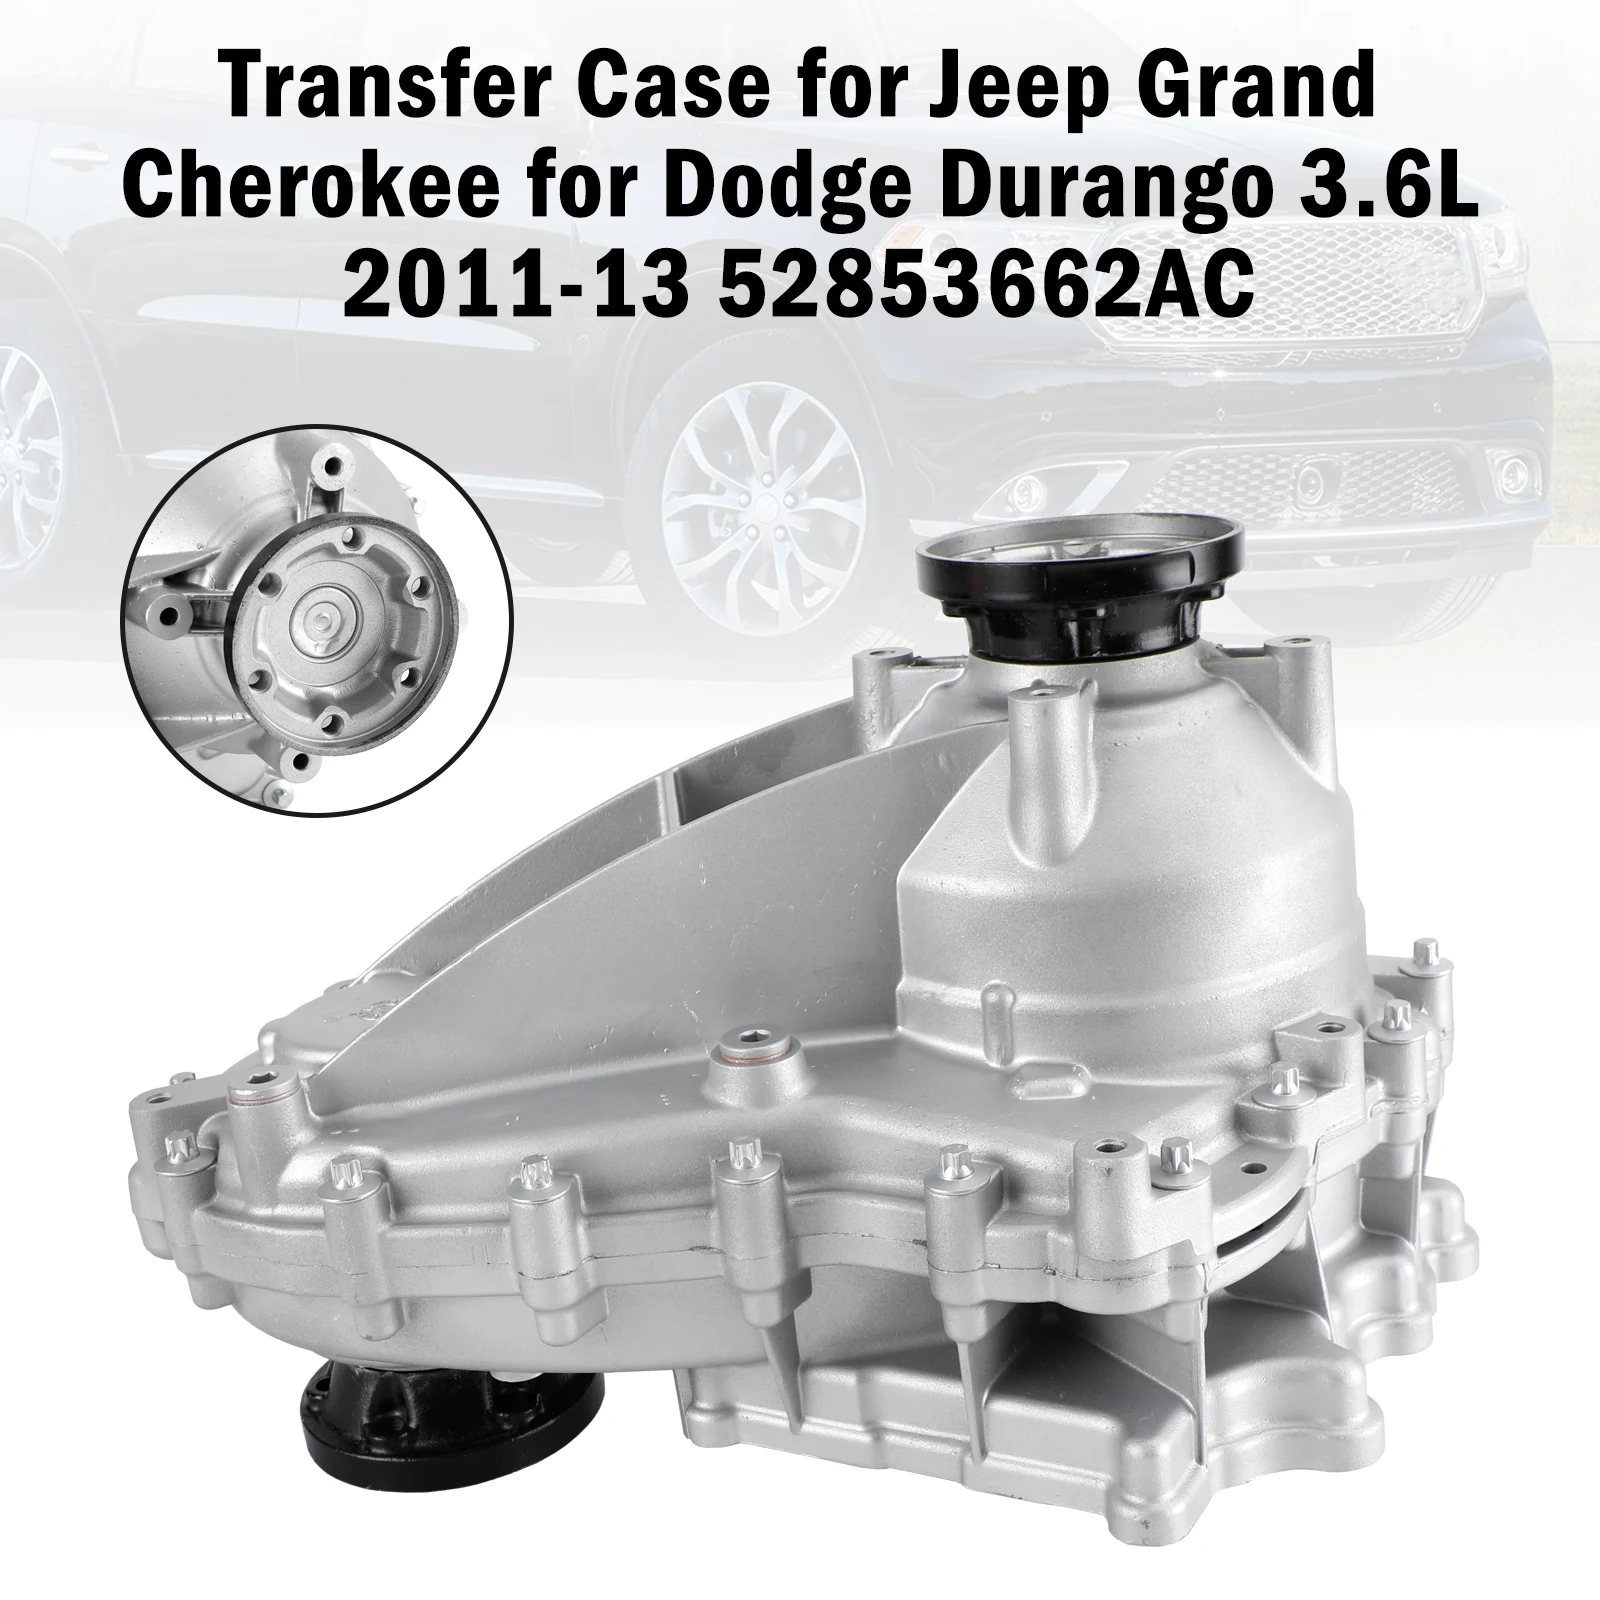 

Areyourshop Transfer Case for Jeep Grand Cherokee for Dodge Durango 3.6L 2011-13 52853662AC Car Accessories Auto Parts